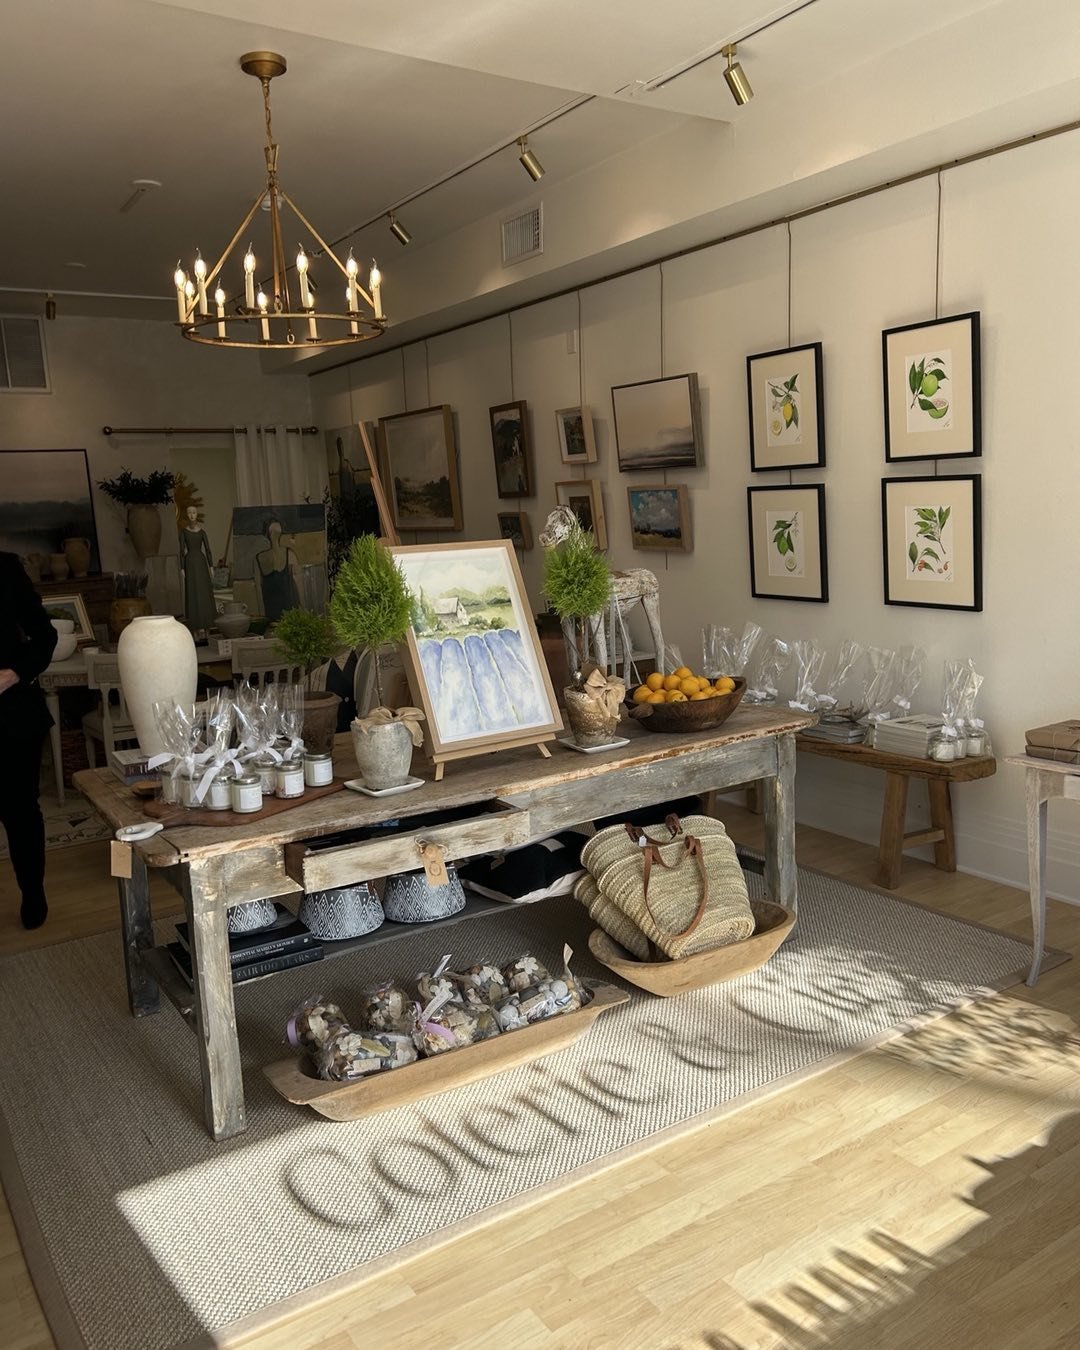 We&rsquo;re open today from 9:30am to 1pm! Come check out our latest arrivals including art, decor, &amp; gifts!
⁠
Visit us on Balboa Island or message us with any inquiries.

#coterieandcie